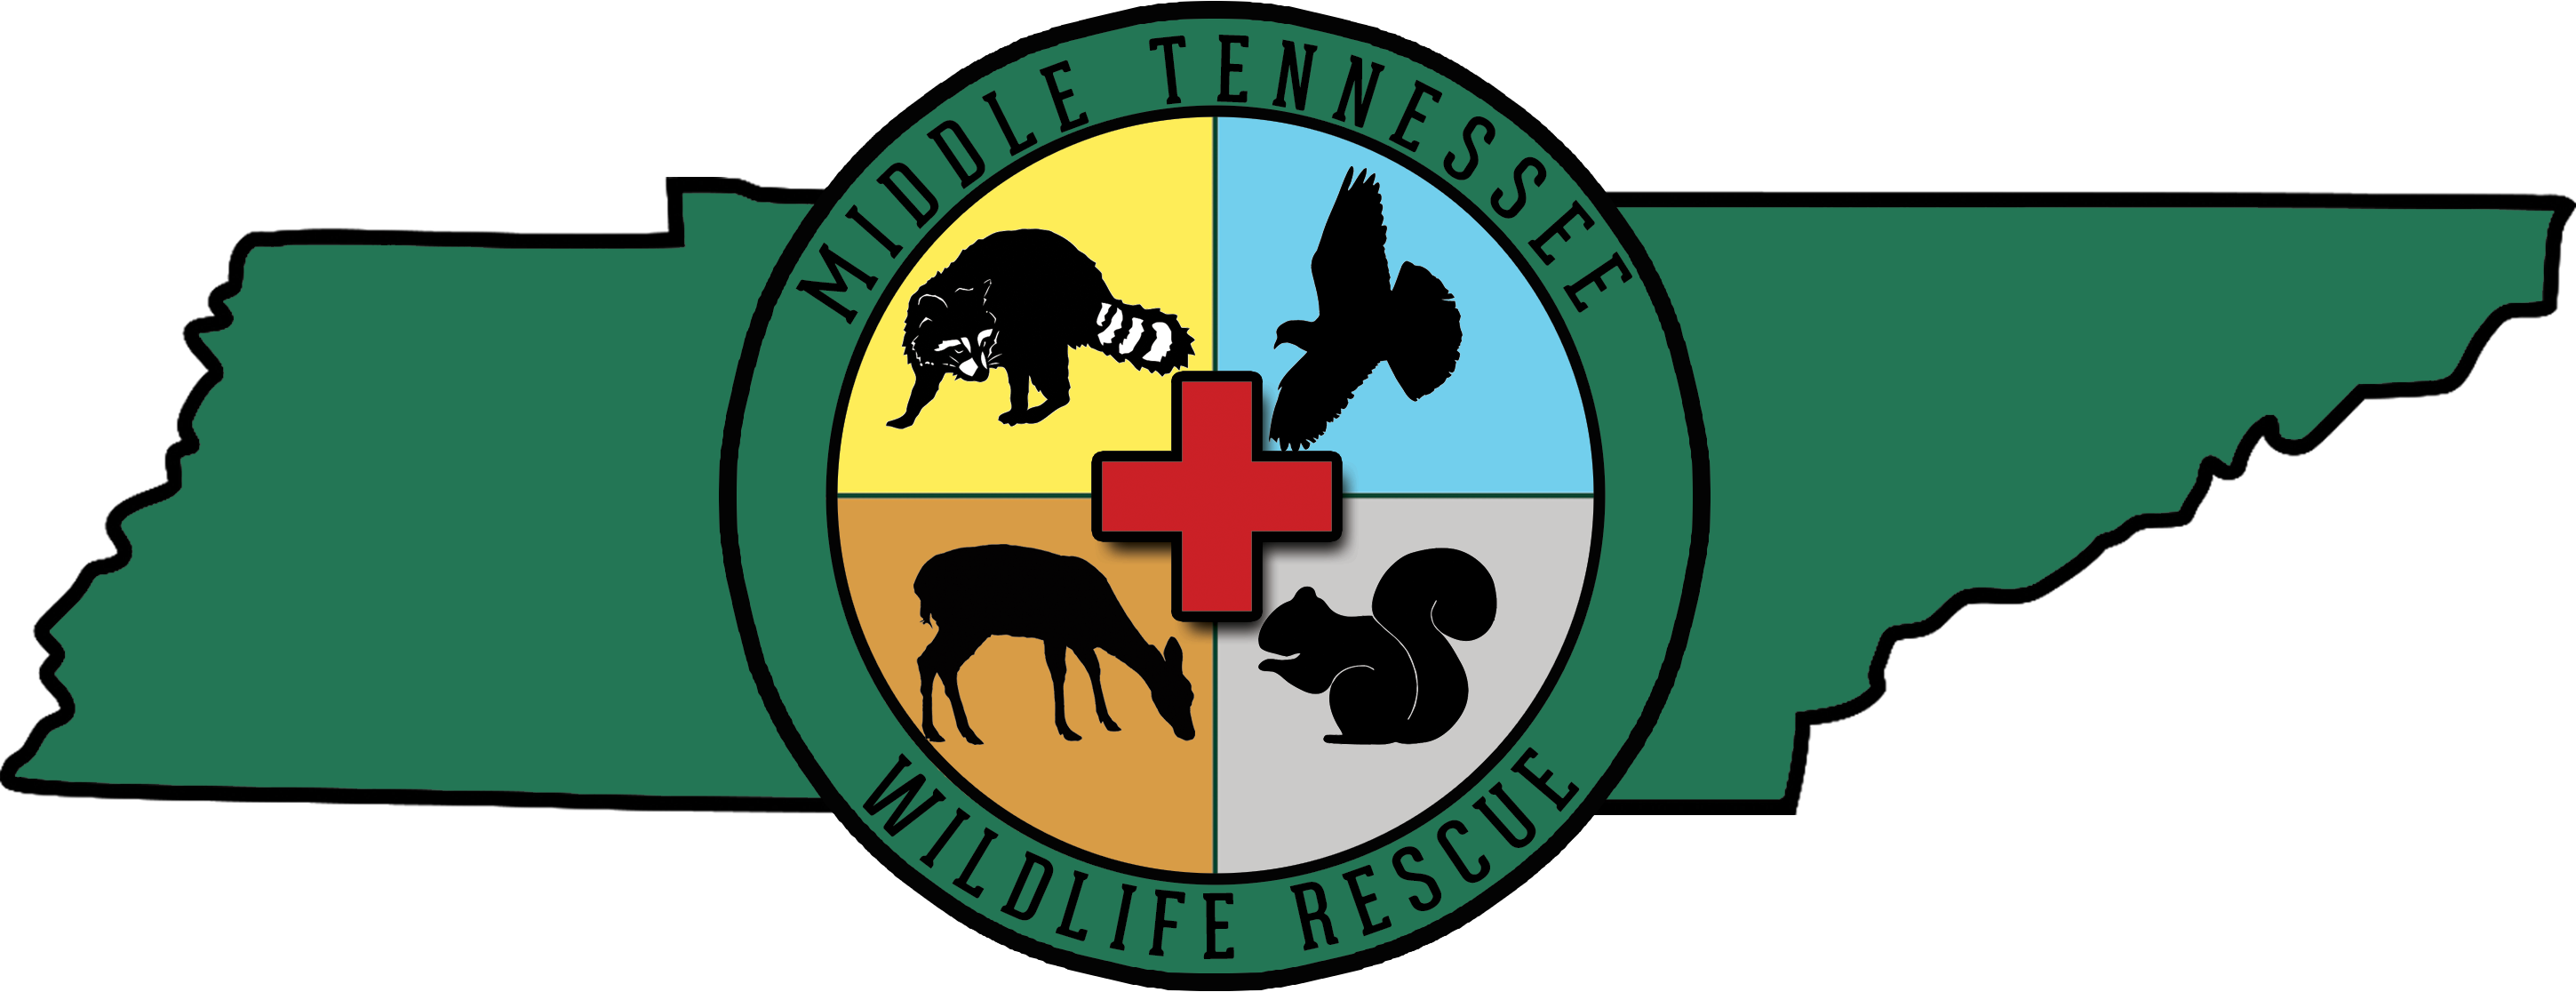 Middle Tennessee Wildlife Rescue logo